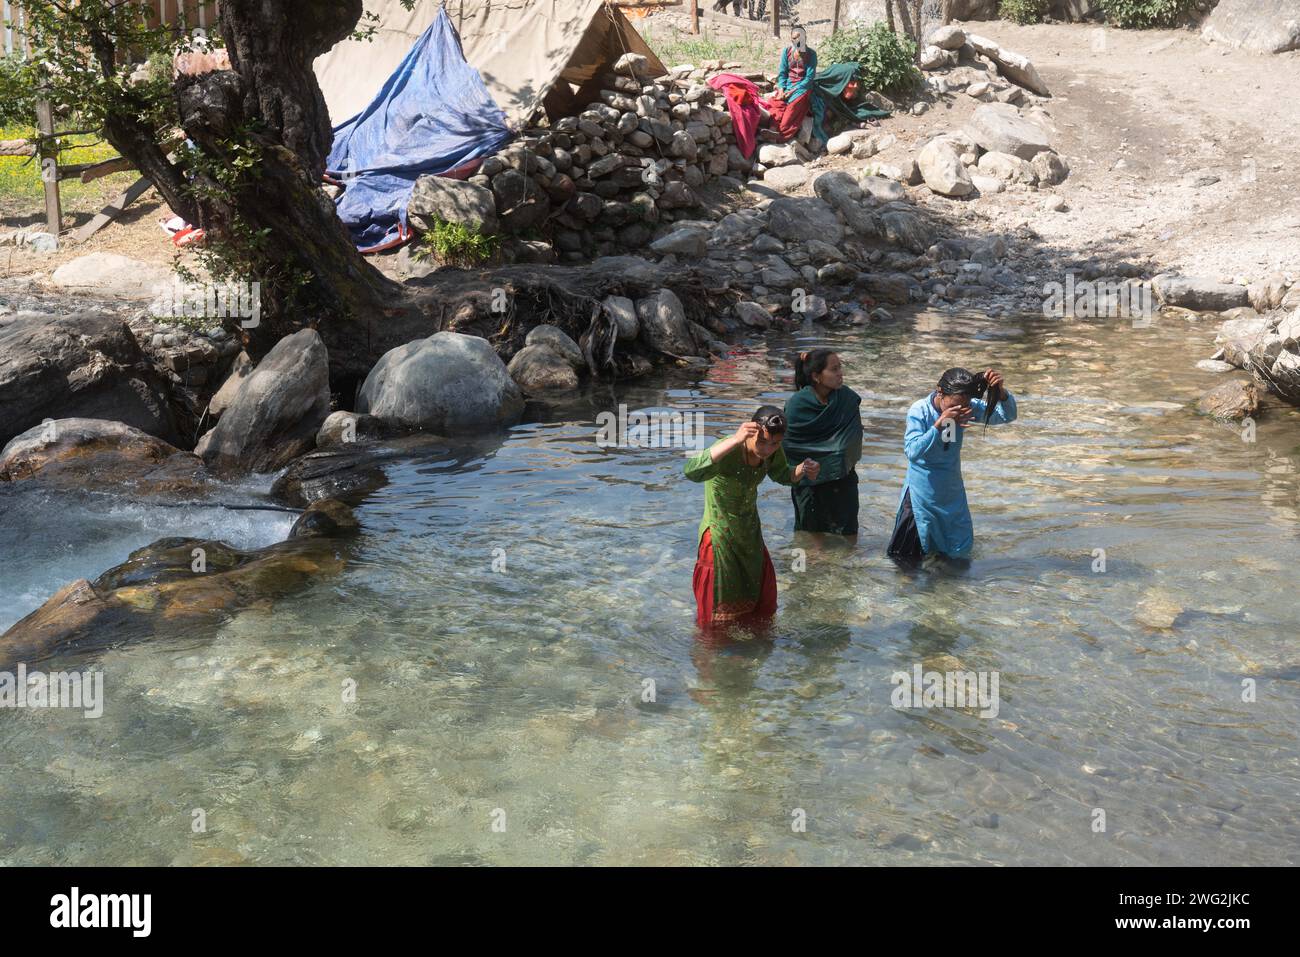 A lively river scene in Sarkegad, a rural Nepali mountain village in Humla. Nepali women in traditional dress wash in the river. Stock Photo